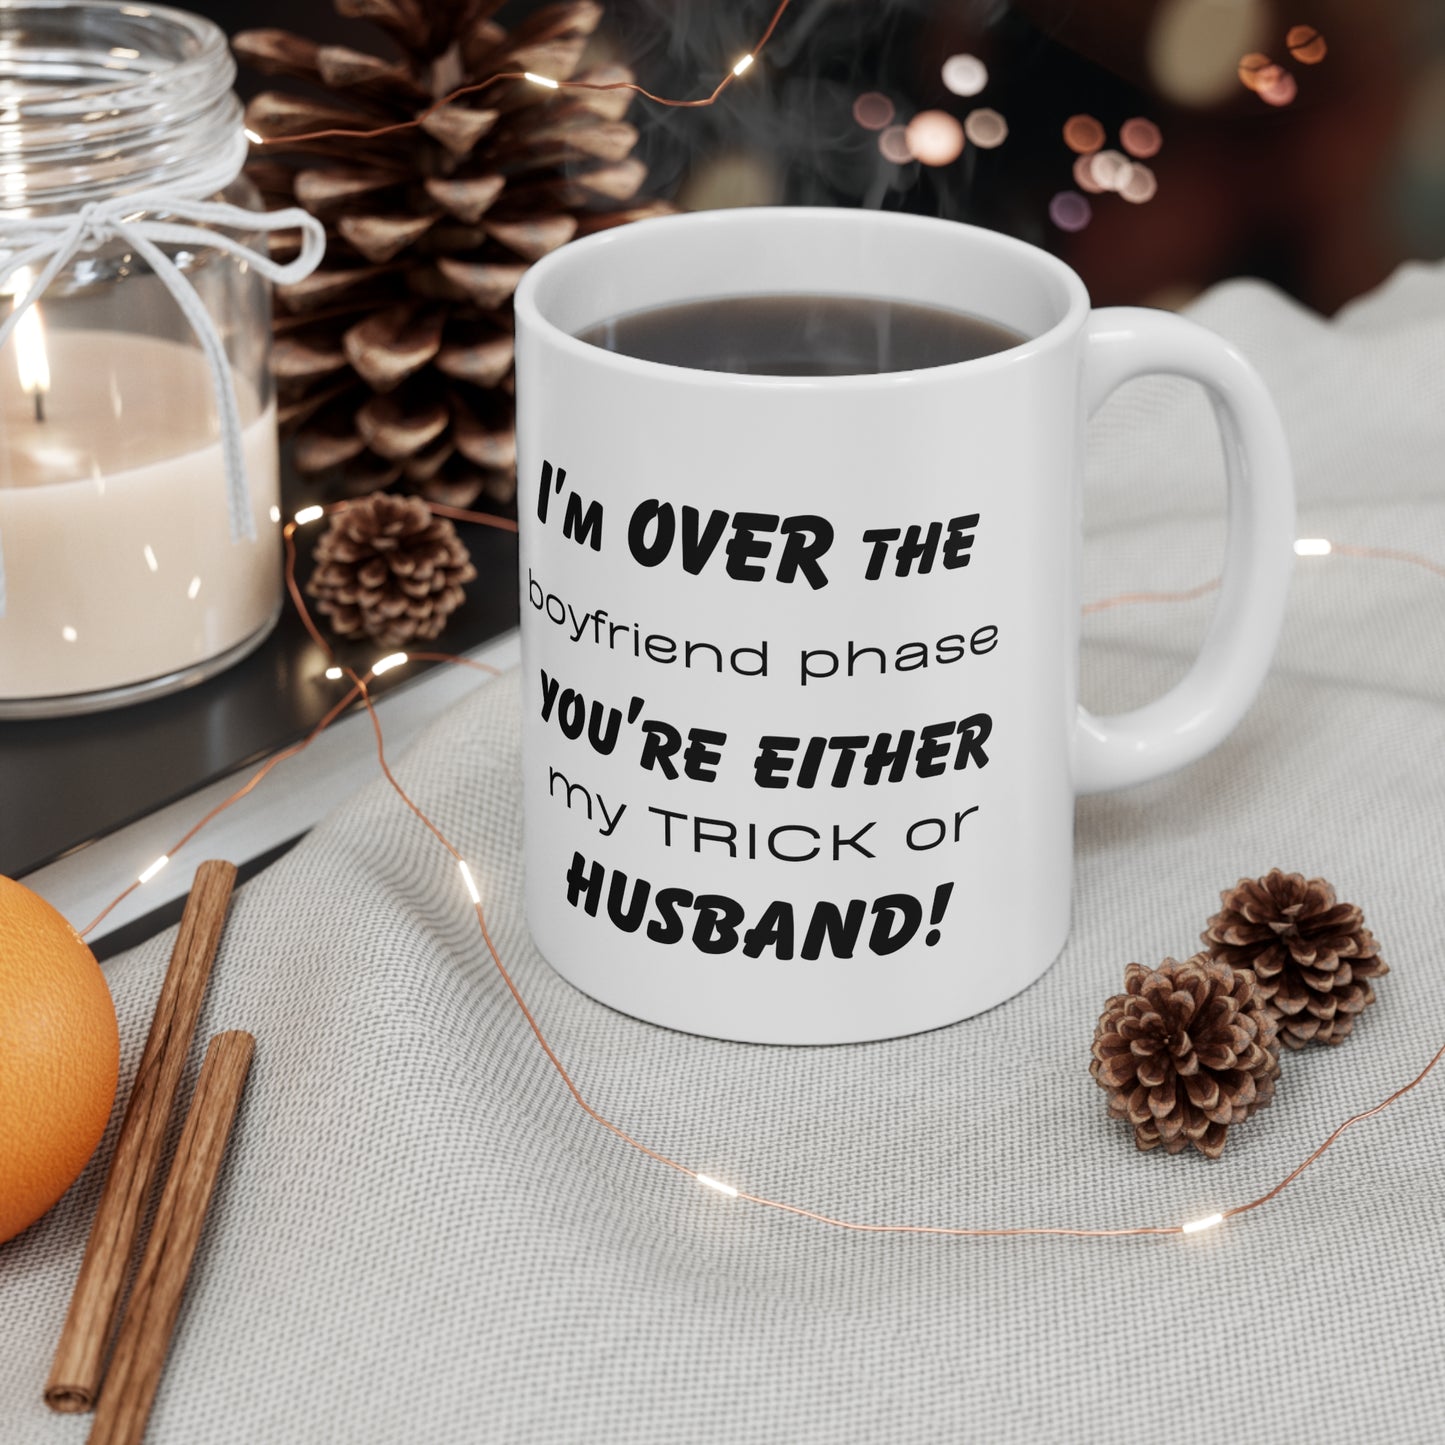 I'm over the boyfriend phase, you're either my trick or my Husband! Ceramic Mug 11oz